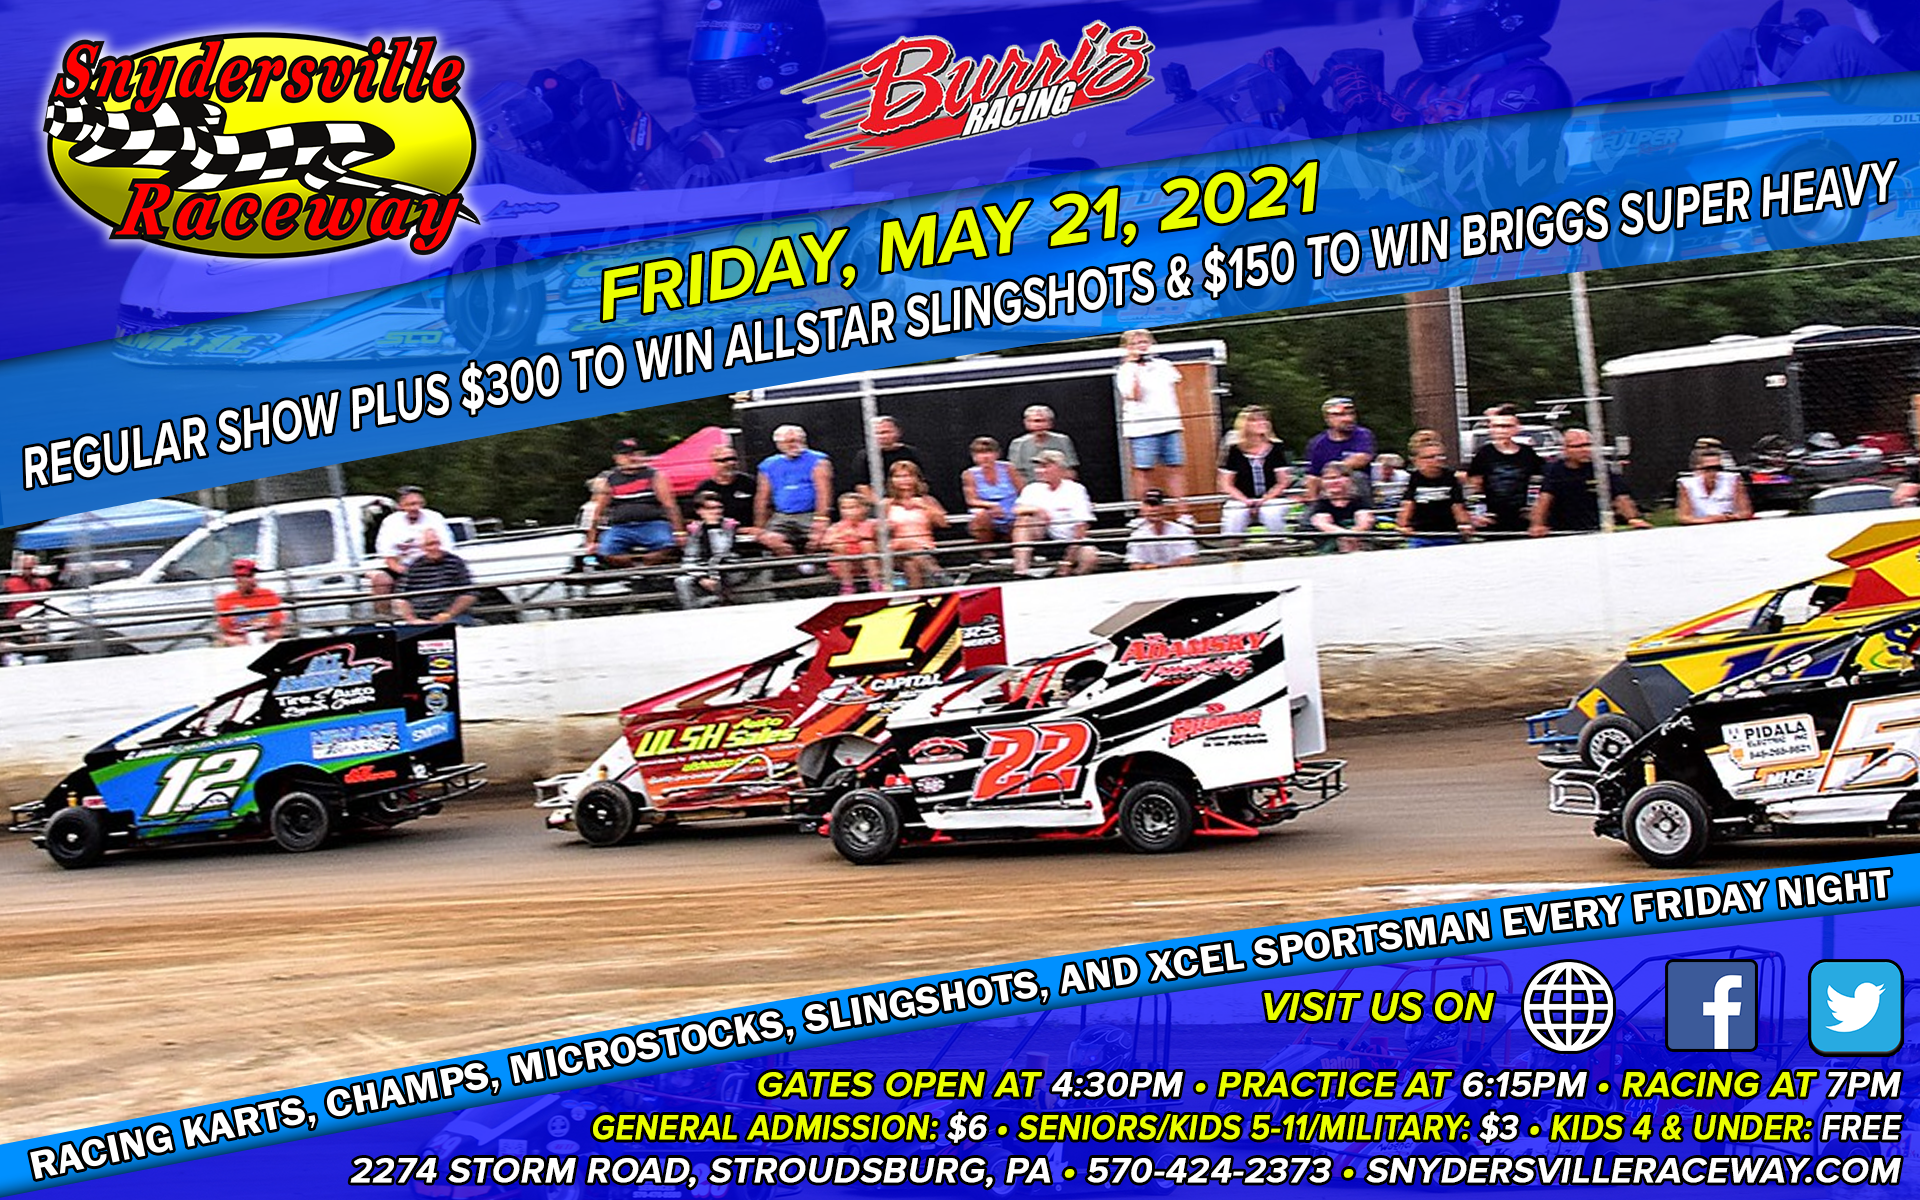 300 To Win Allstar Slingshots 150 To Win Briggs Super Heavy To Highlight Friday May 21 With Regular Show Snydersville Raceway